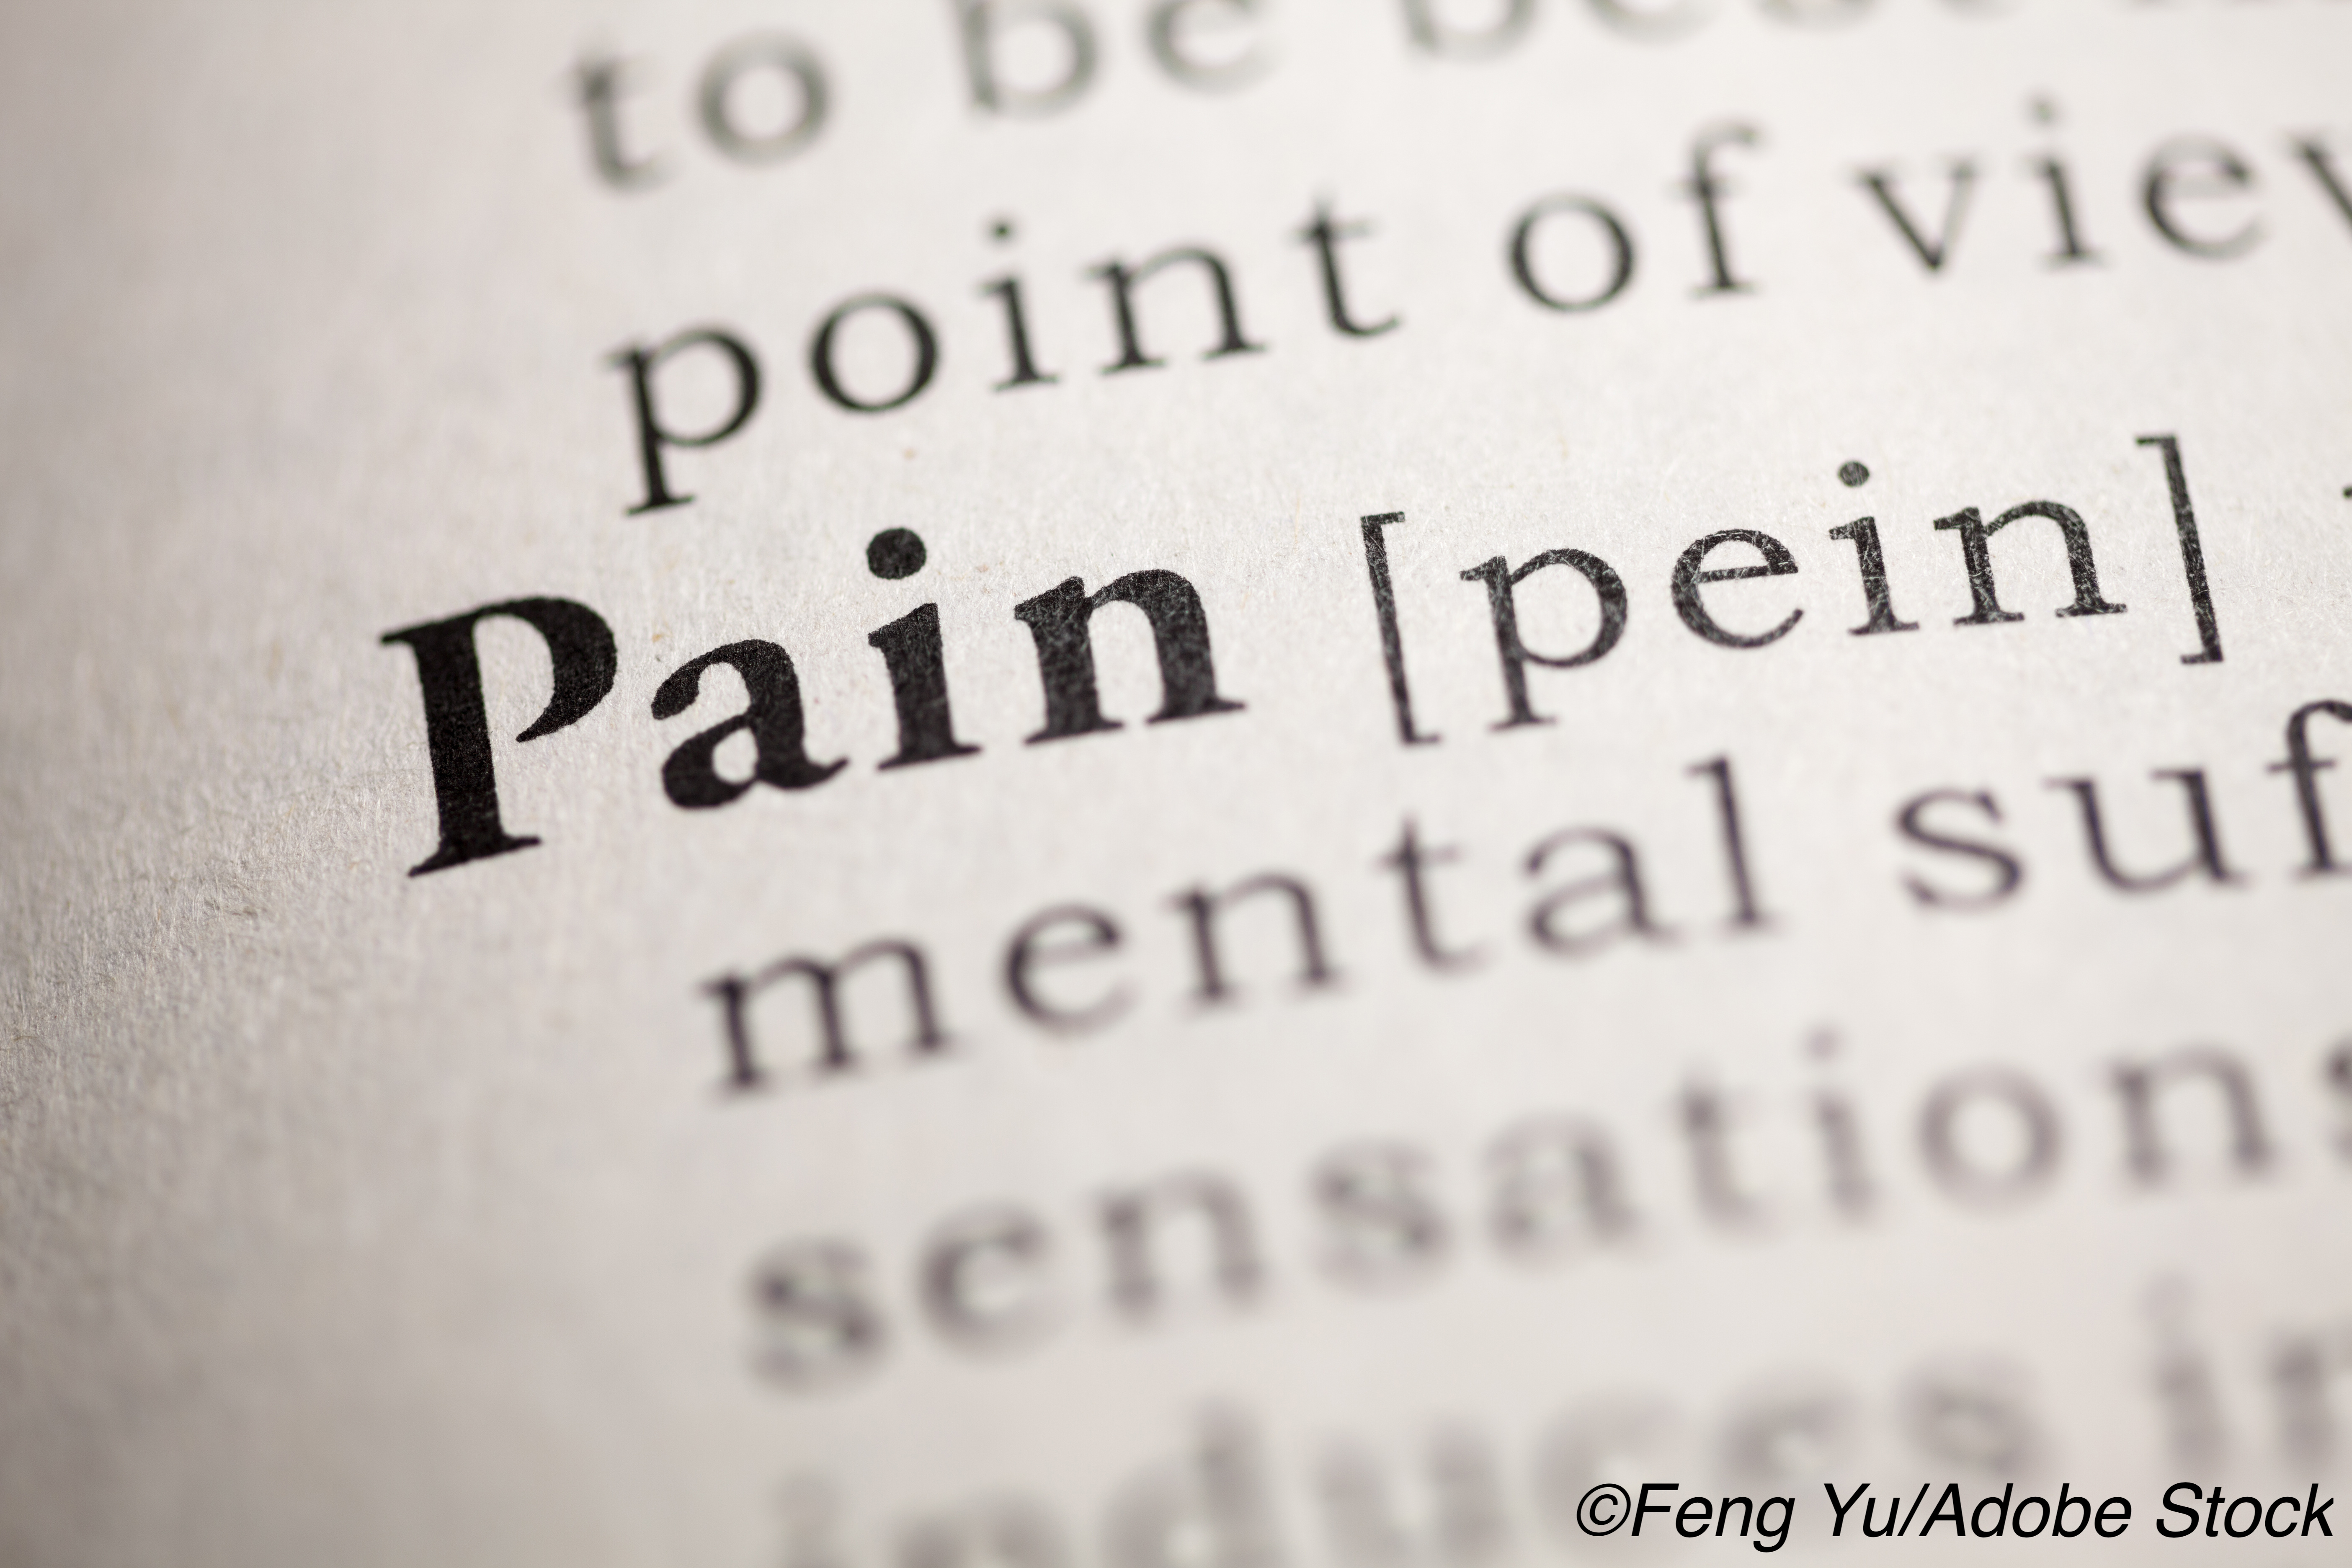 IASP Revises Definition of Pain for First Time Since 1979